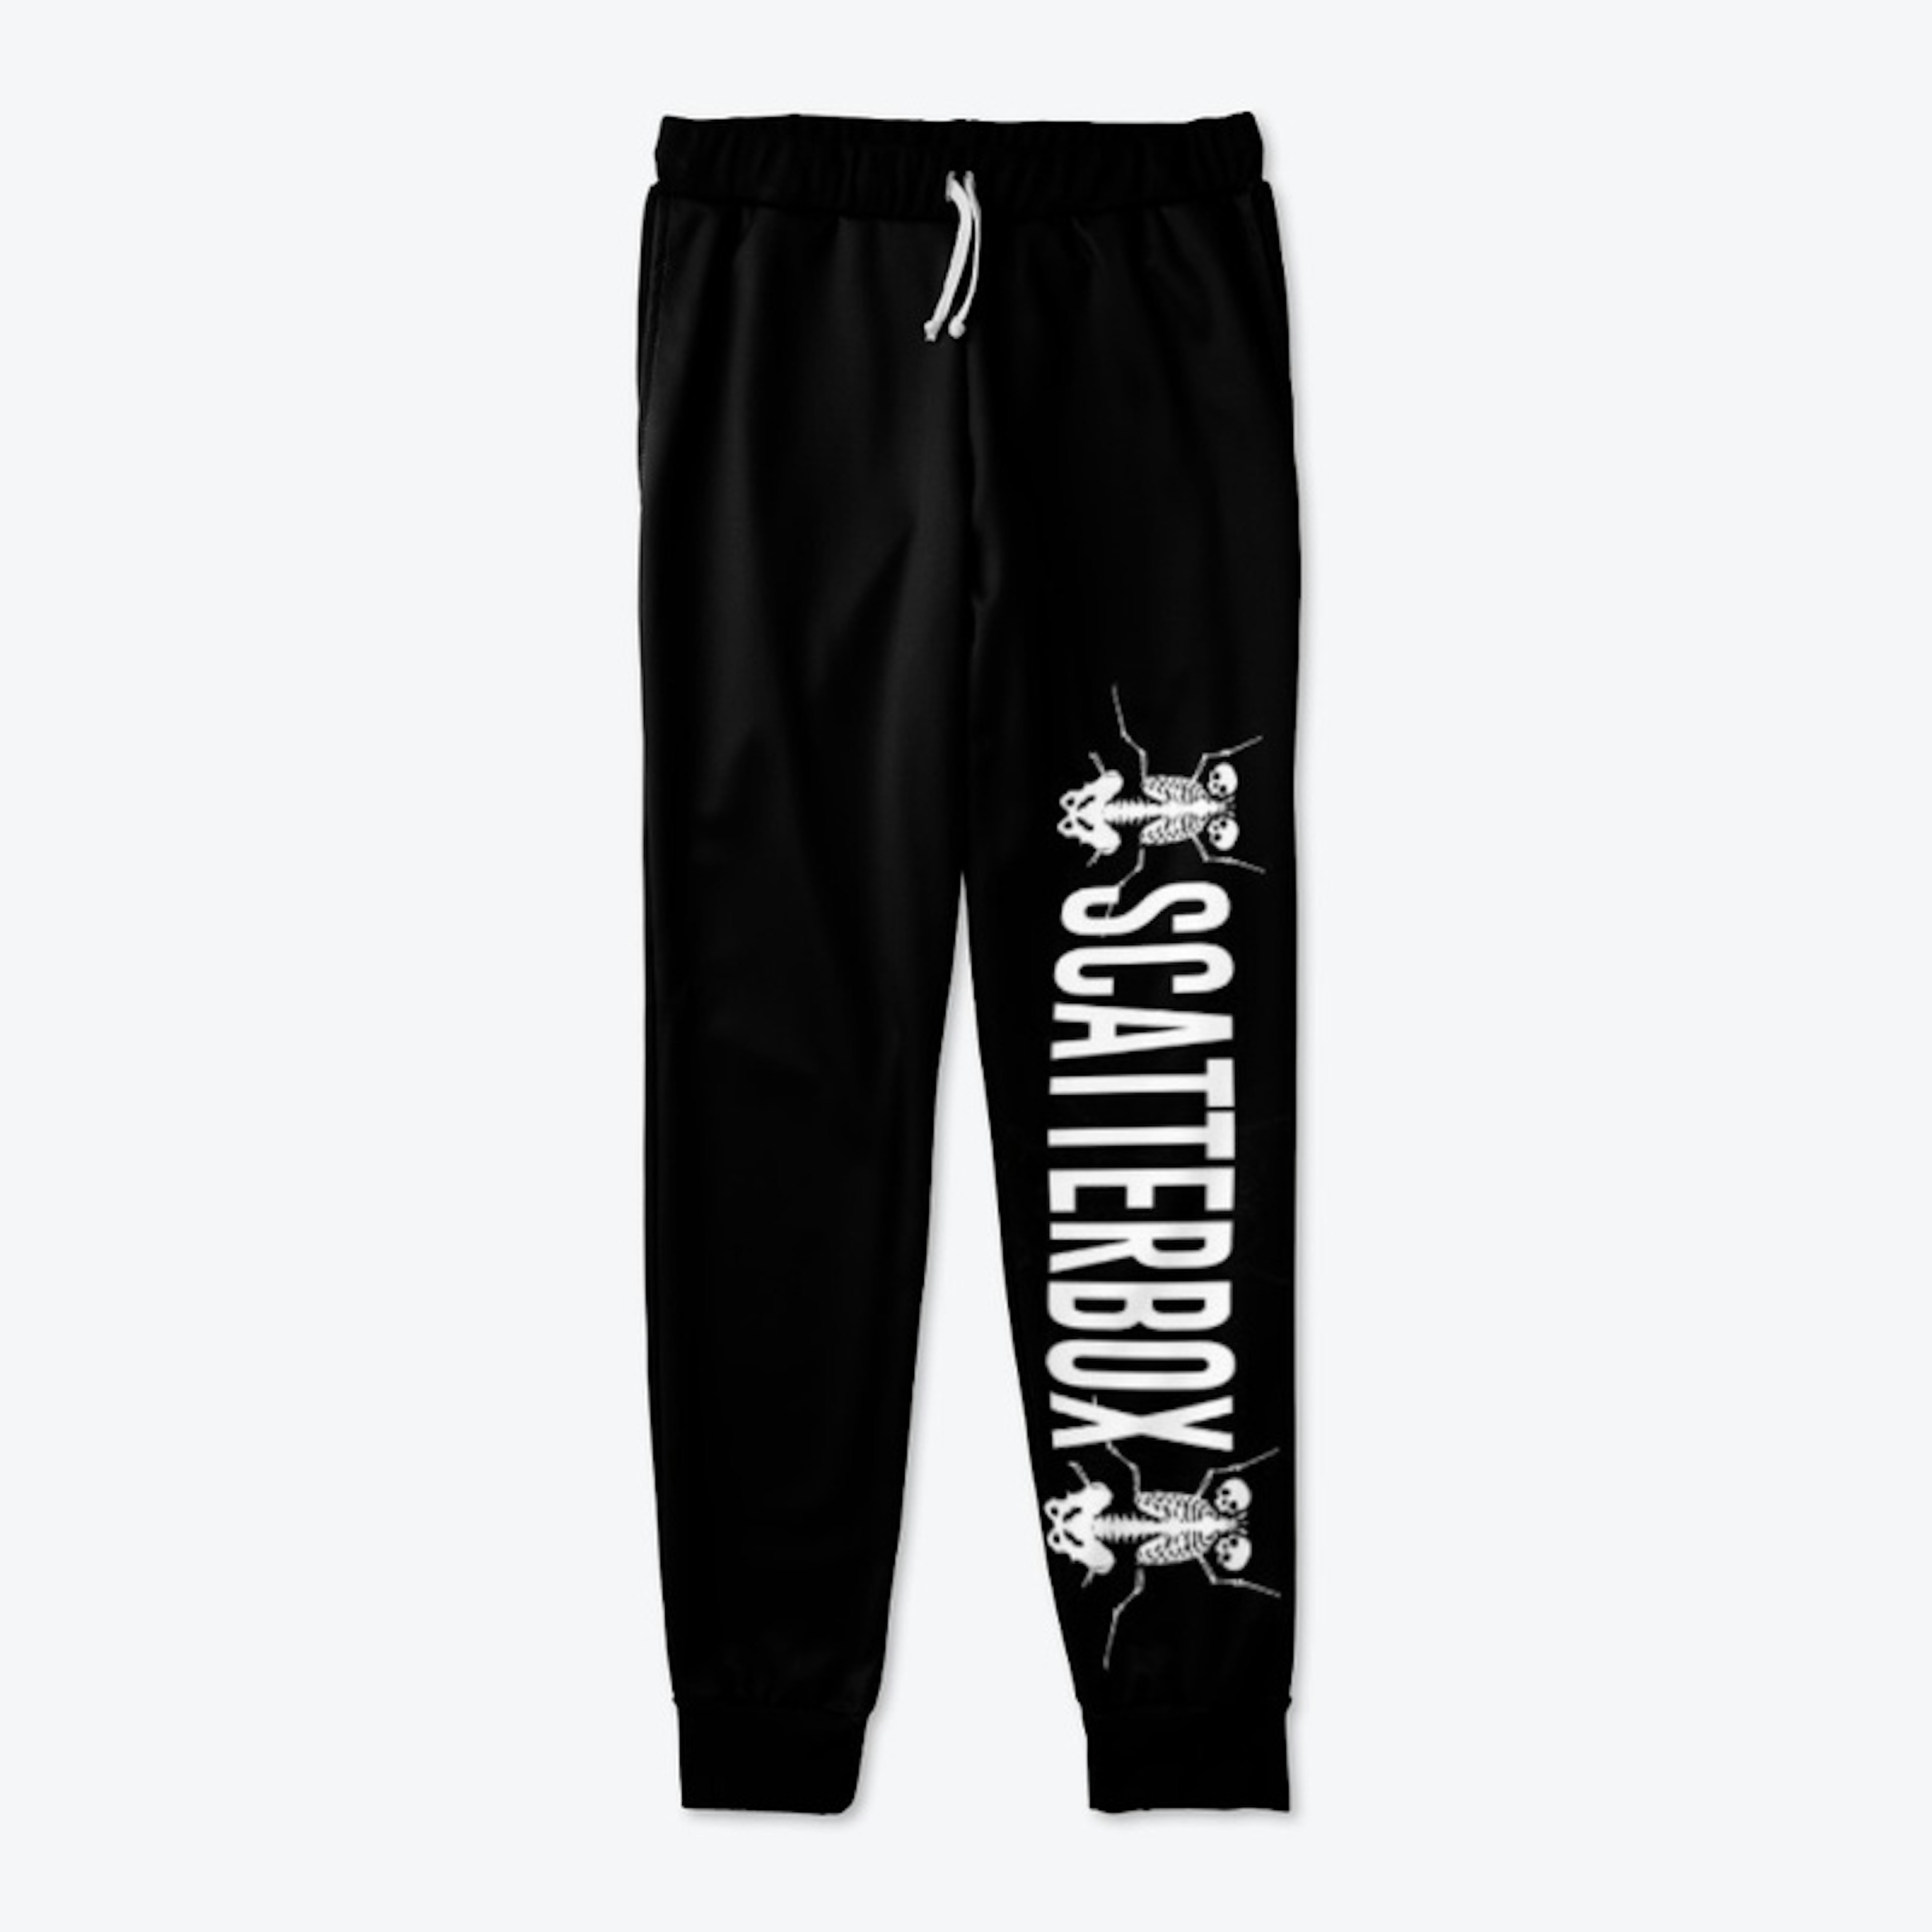 Scatterbox "Bug" Joggers